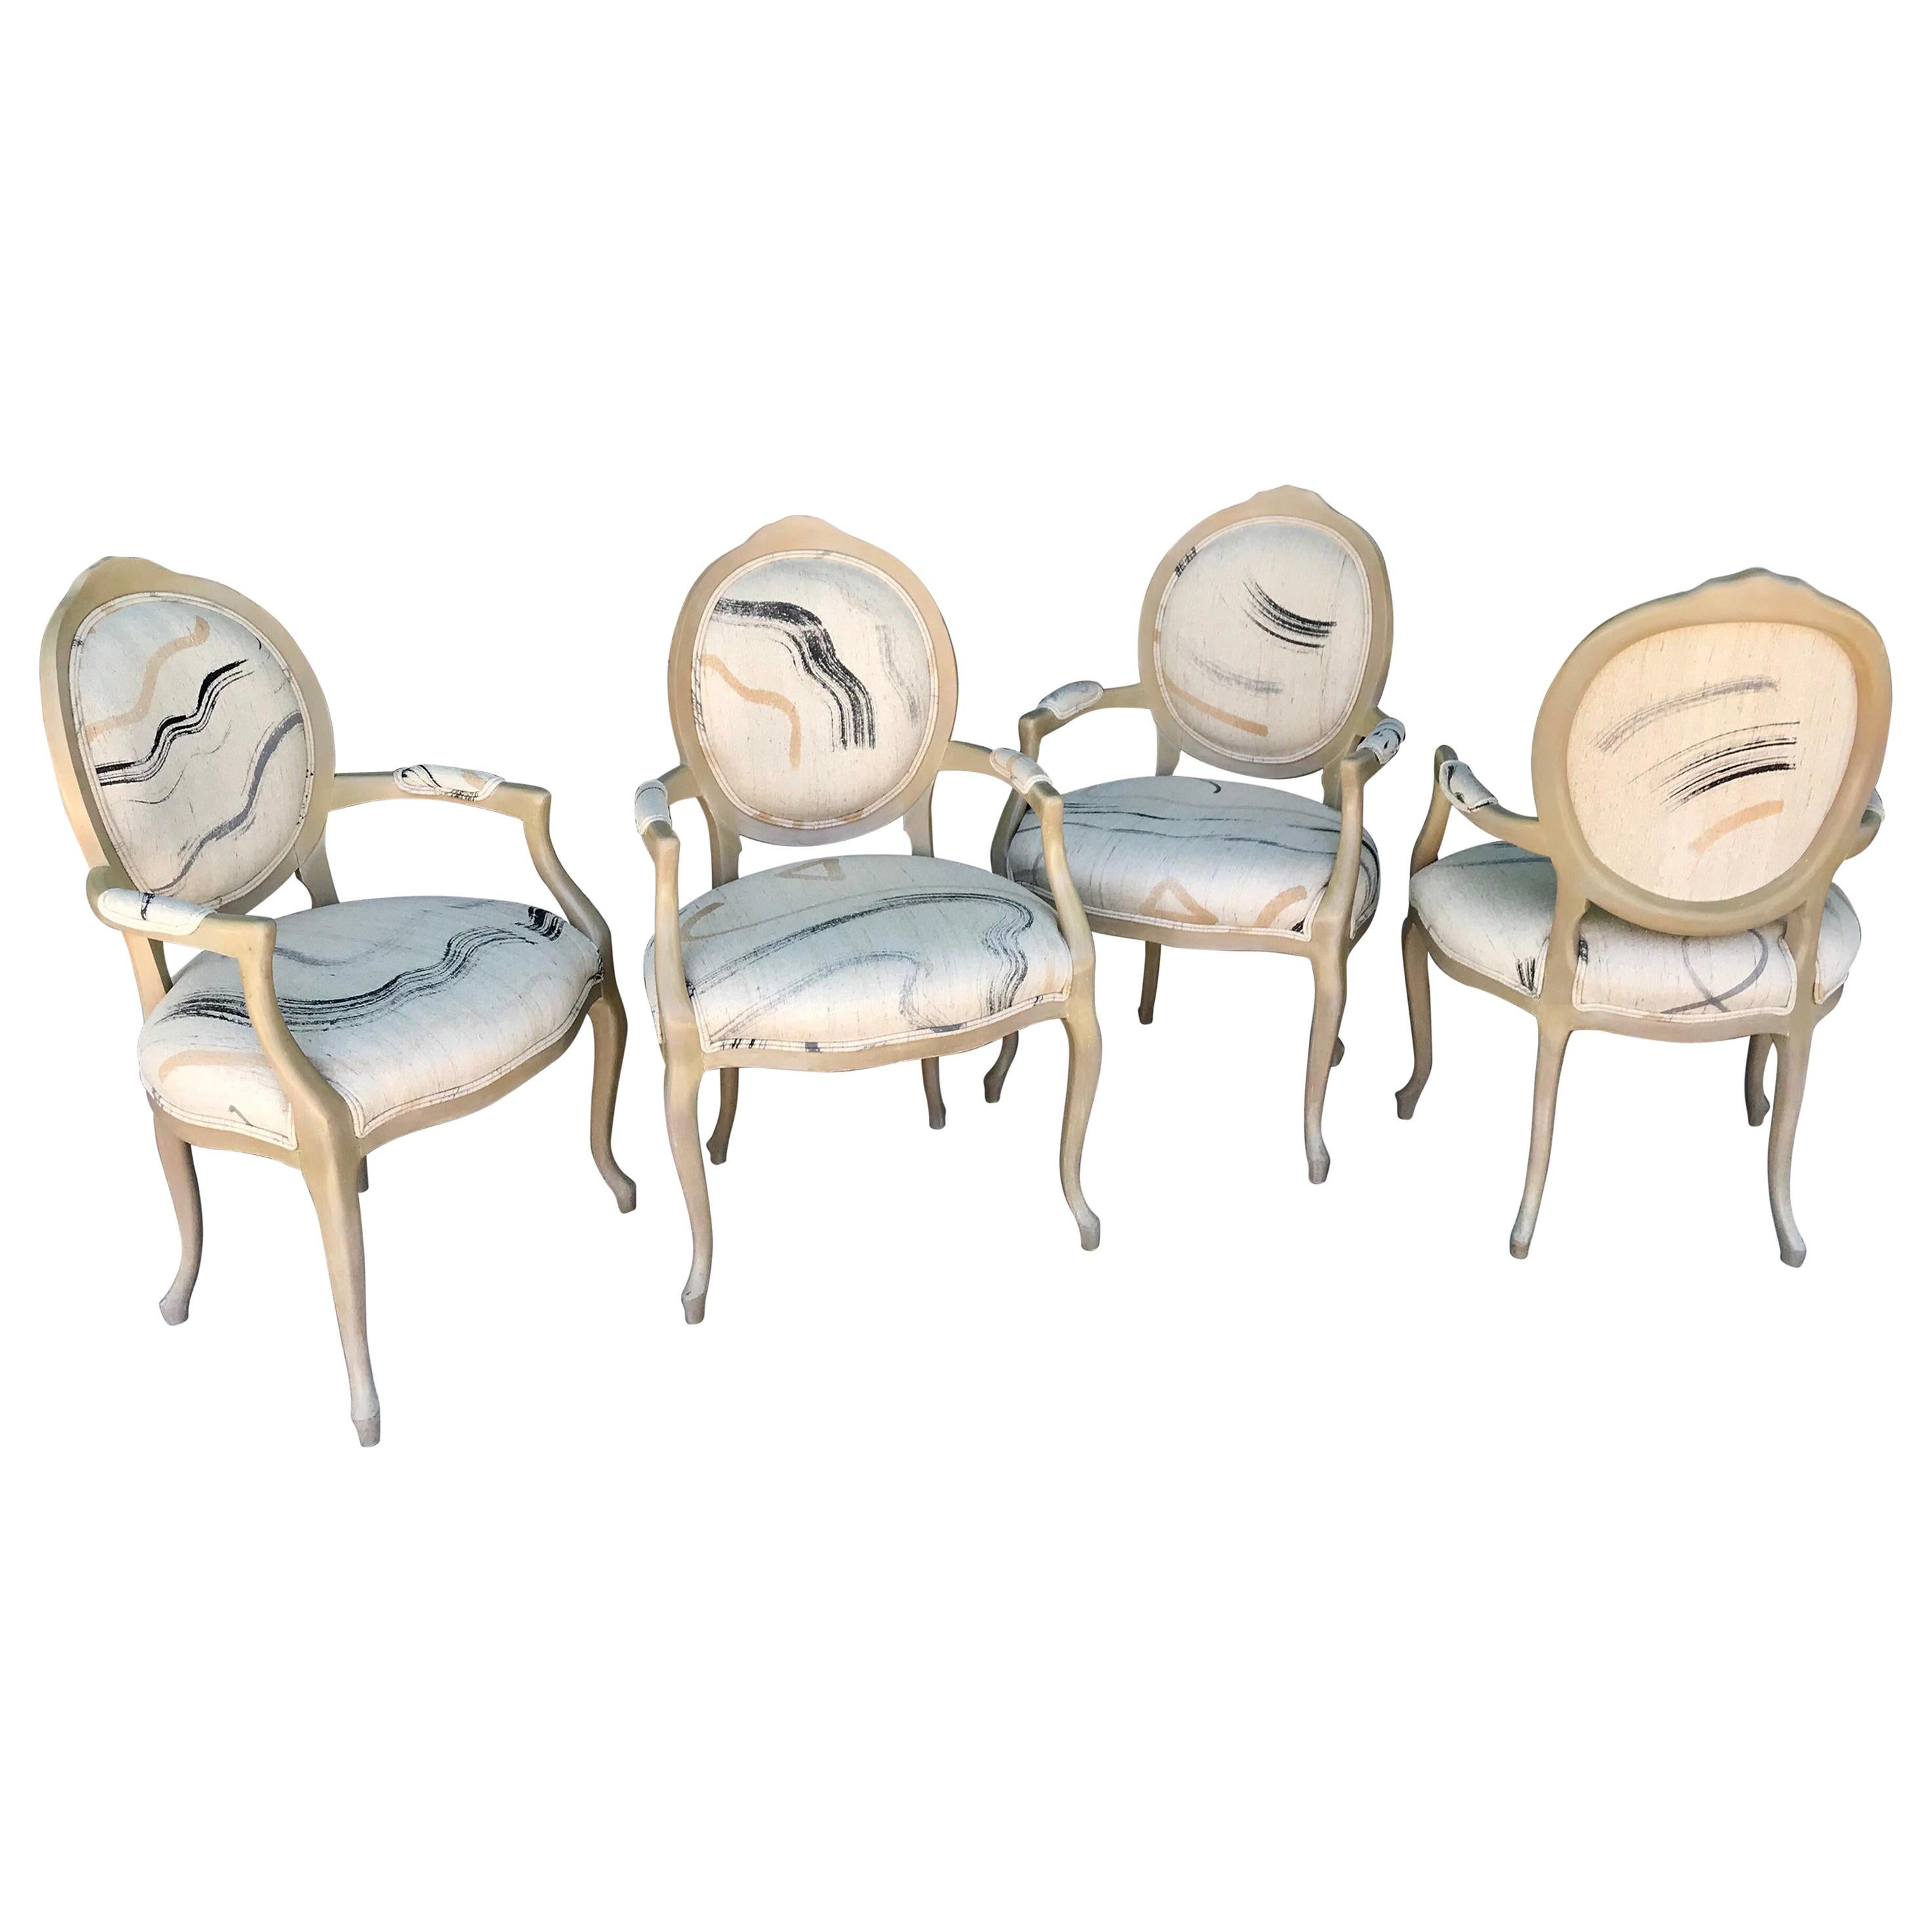 Steve Chase Set of Four Modern Art Dining or Game Table Chairs